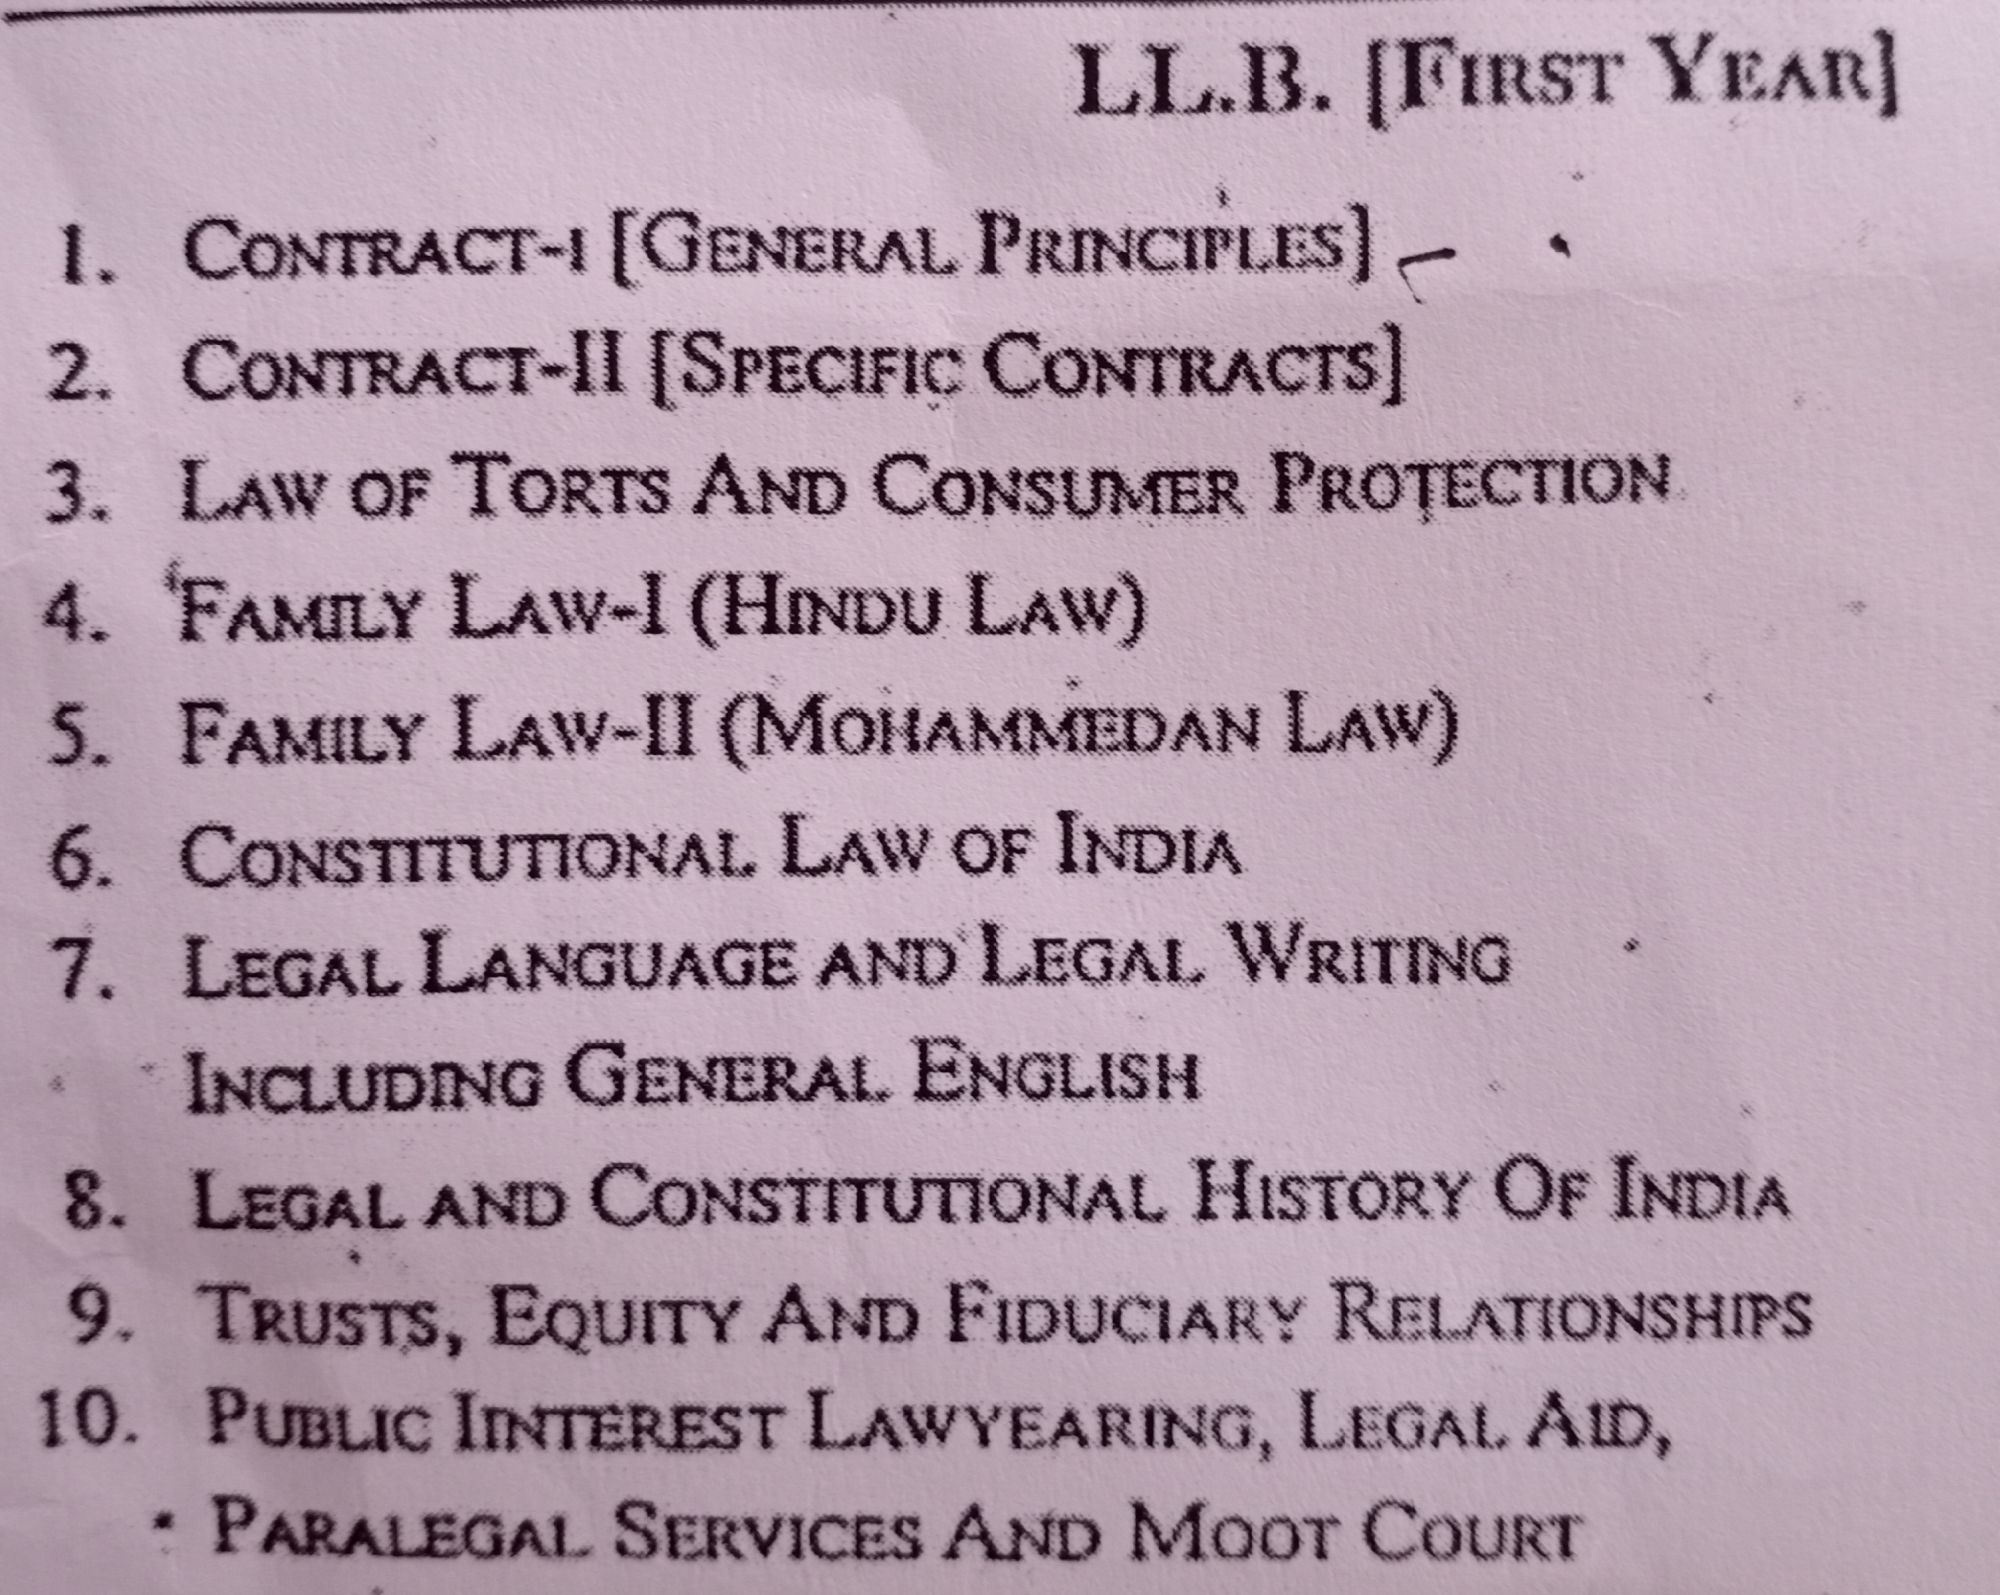 Basanti Lal Babel Trusts, Equity And Fiduciary Relationship in English Medium